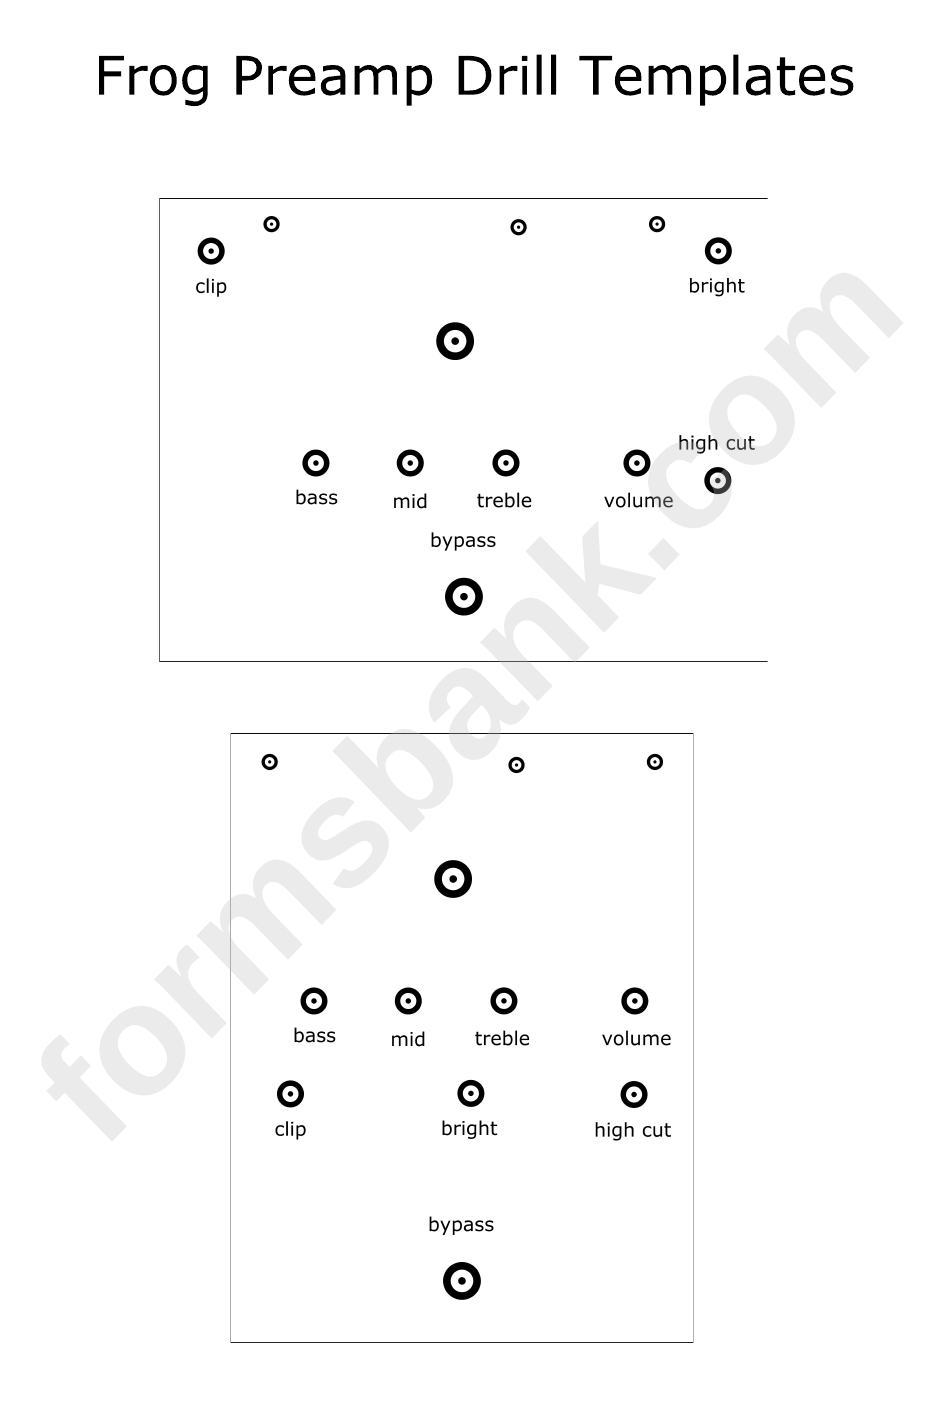 Frog Preamp Drill Templates